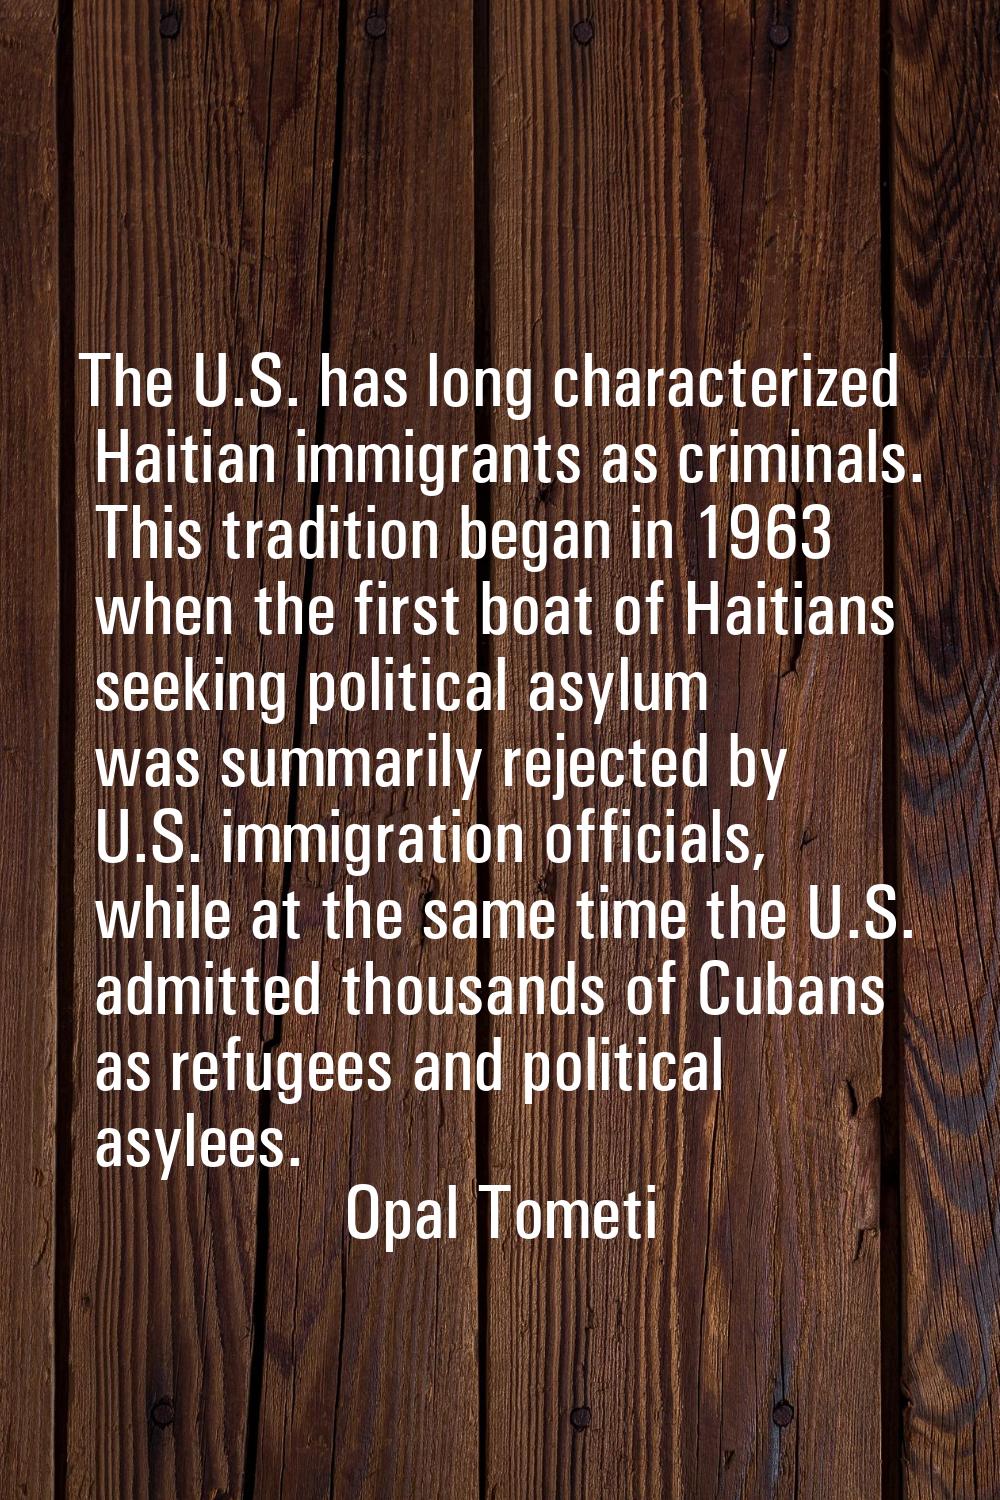 The U.S. has long characterized Haitian immigrants as criminals. This tradition began in 1963 when 